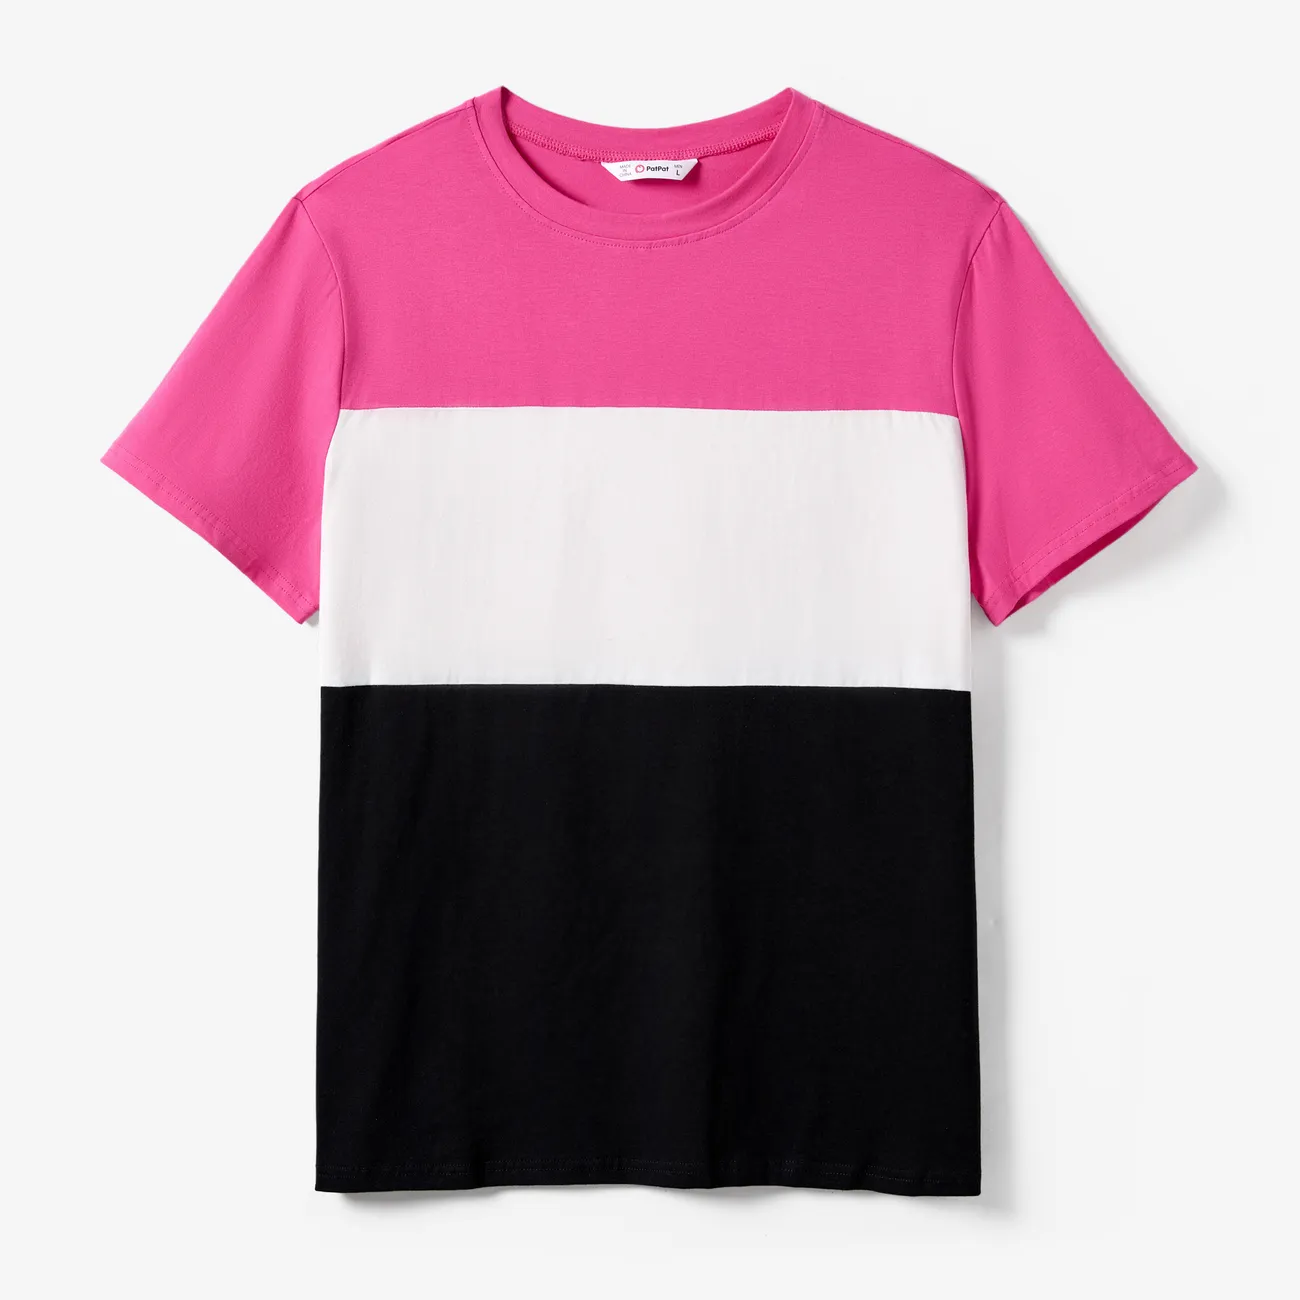 Family Matching Colorblock T-shirt and Hot Pink Button Neck-Tie Strap Dress Sets Roseo big image 1